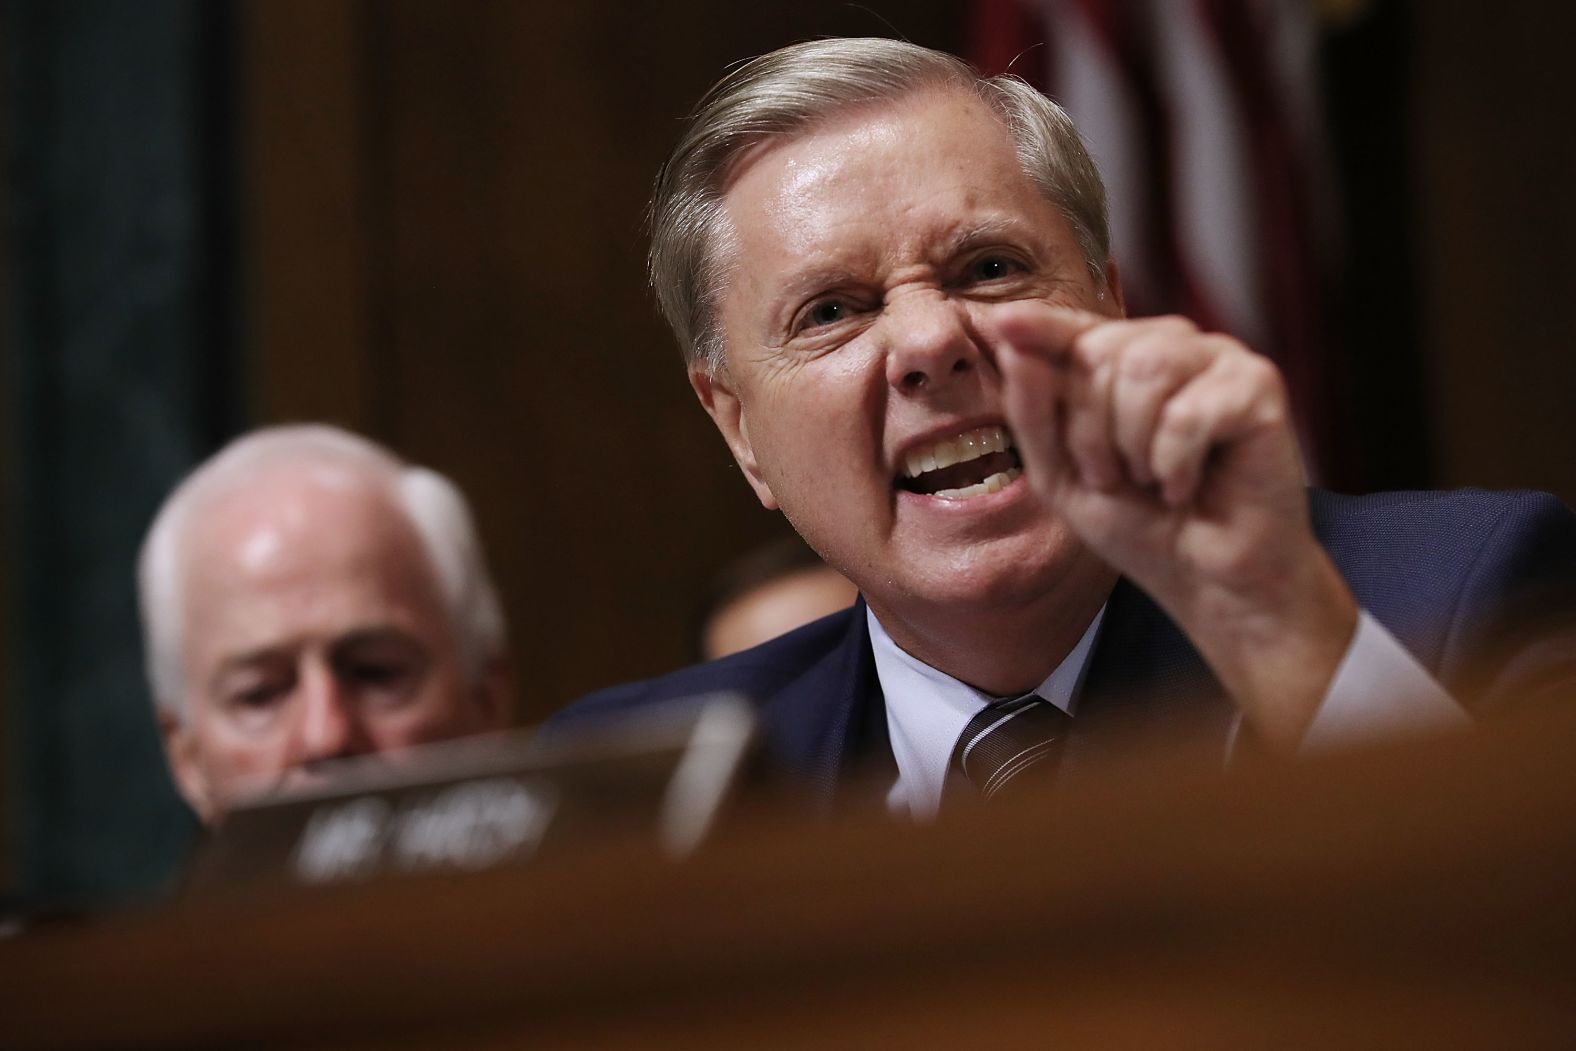 Sen. Lindsey Graham, a Republican from South Carolina, shouts at his Democratic colleagues during questioning. He called this "the most unethical sham since I've been in politics."